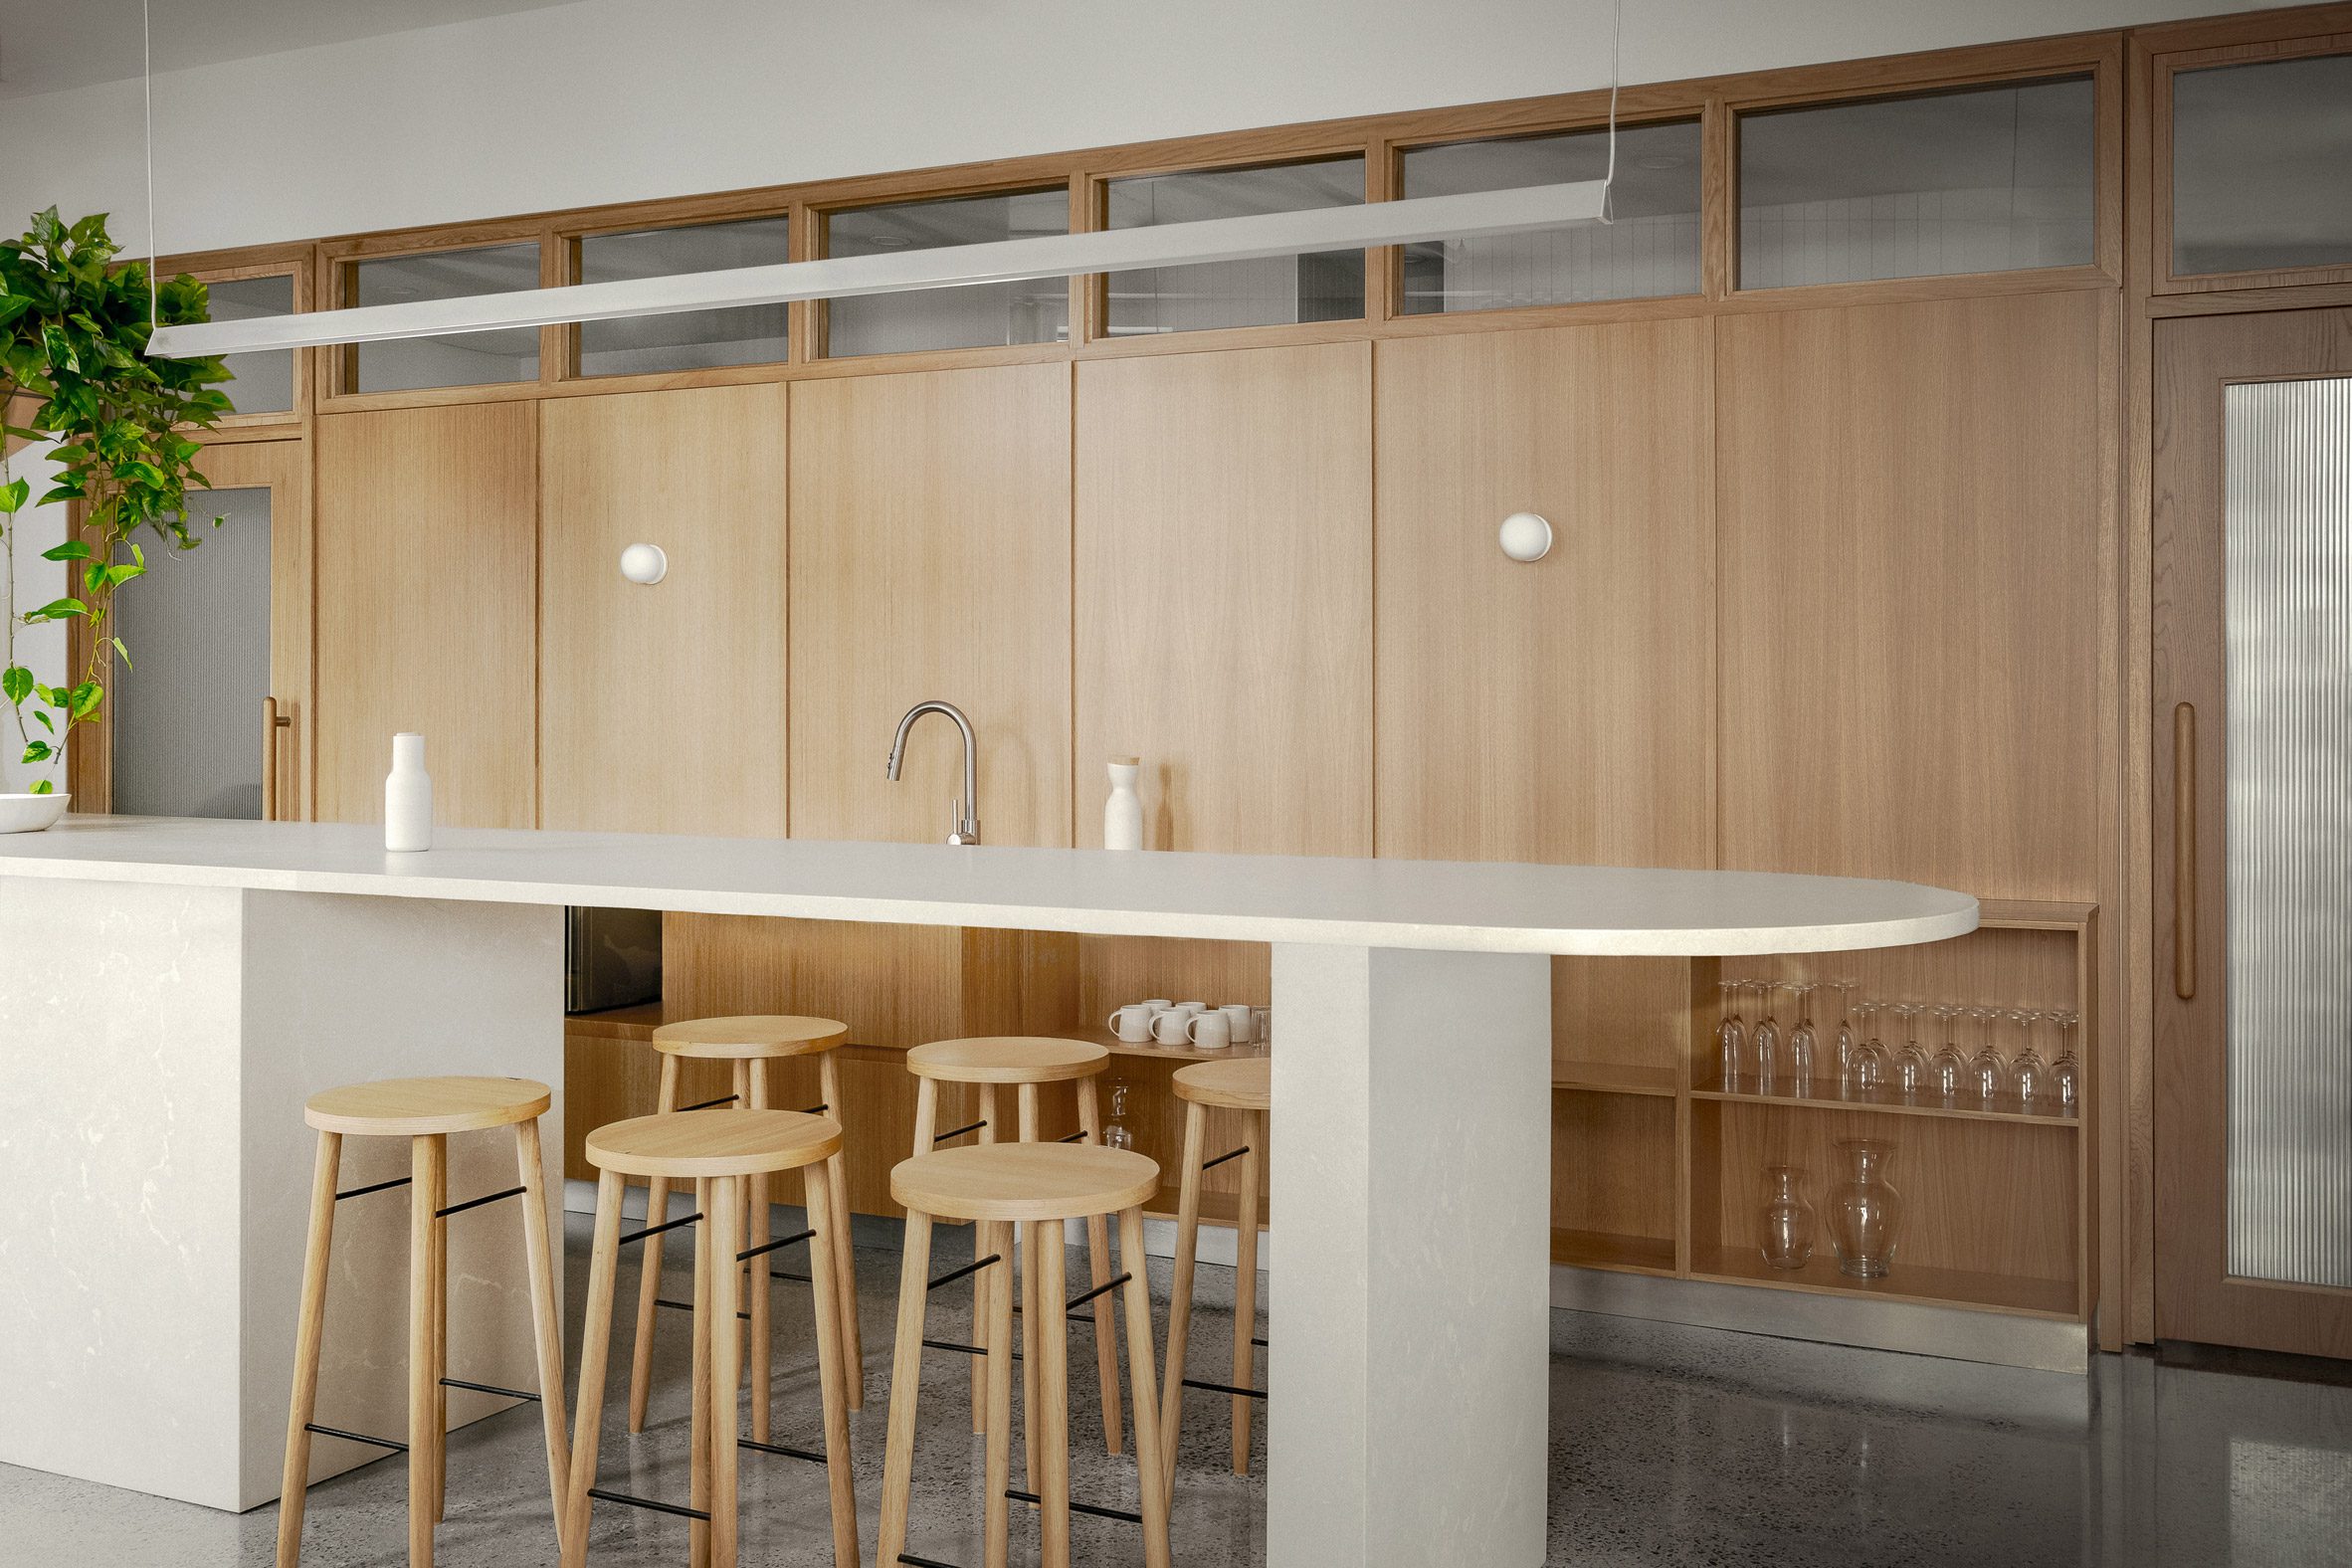 Communal kitchen with wood-panelled wall and a central concrete island